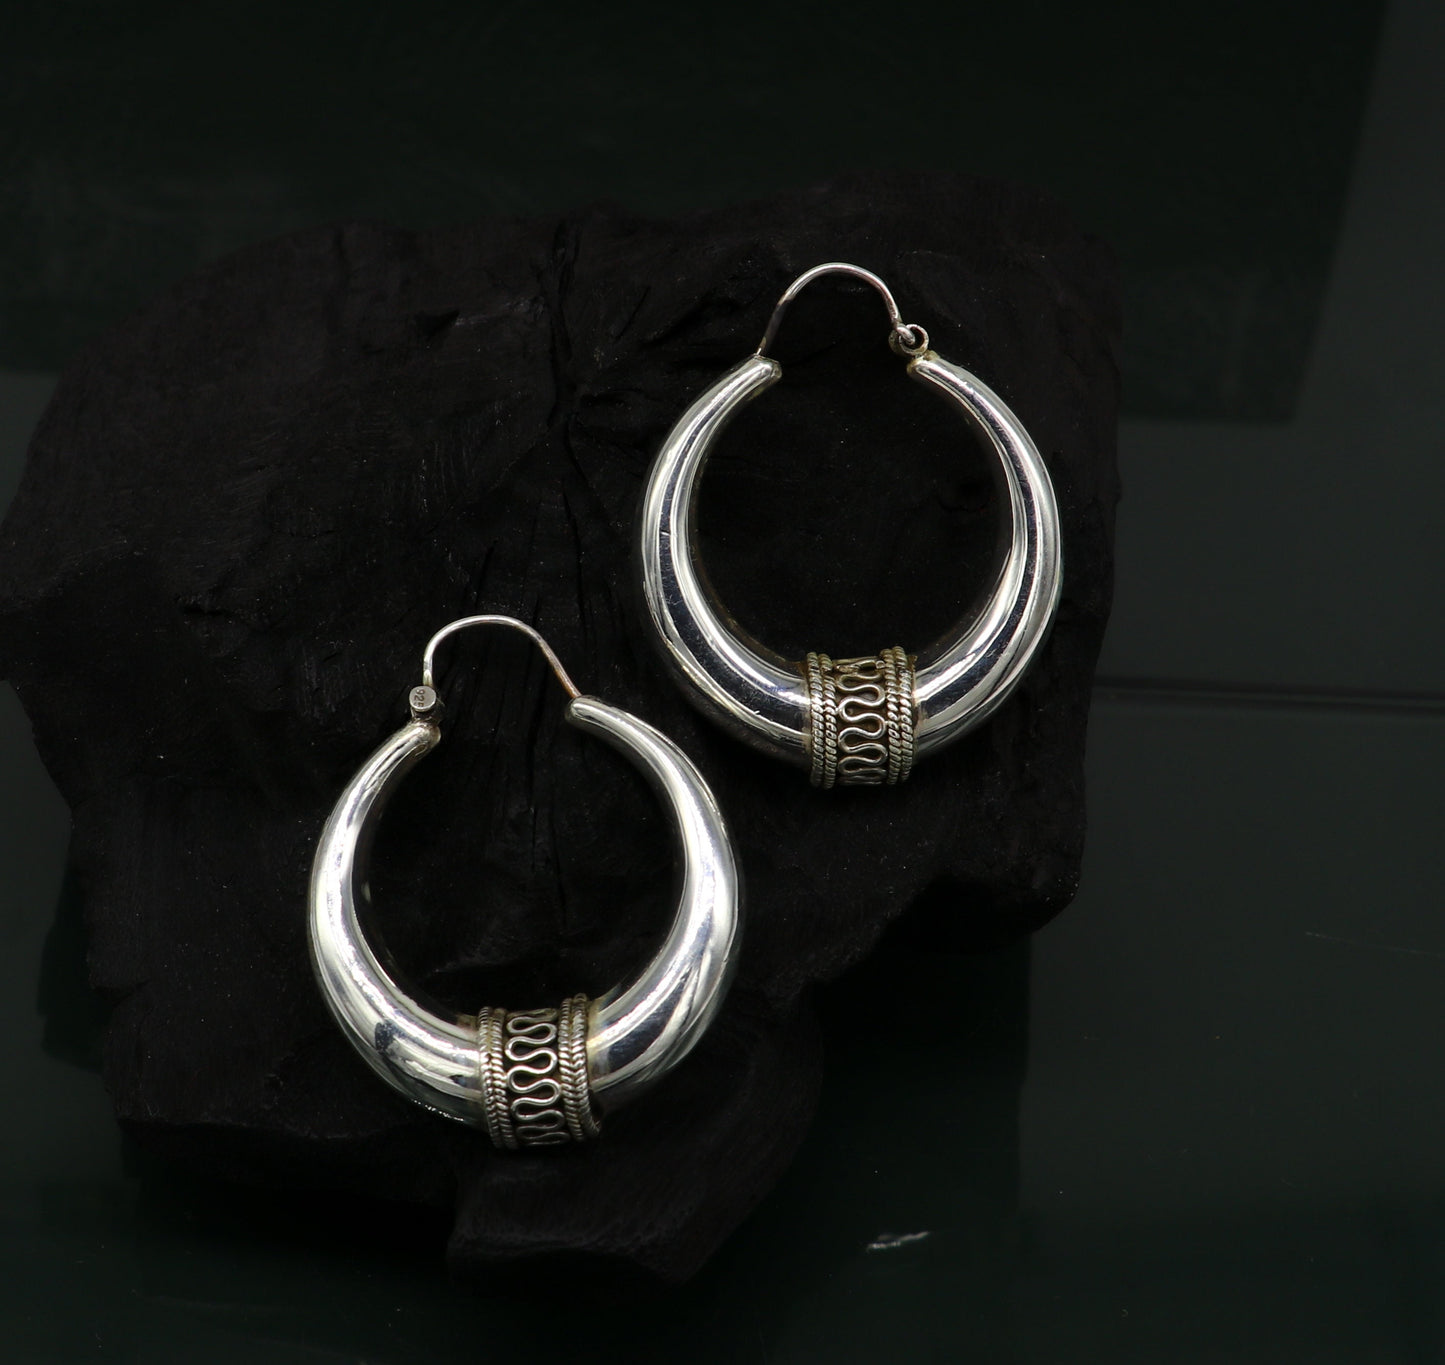 Vintage Design 925 sterling silver fabulous hoops earring, tribal kundal earring from Rajasthan India, best gifting unisex jewelry ear612 - TRIBAL ORNAMENTS